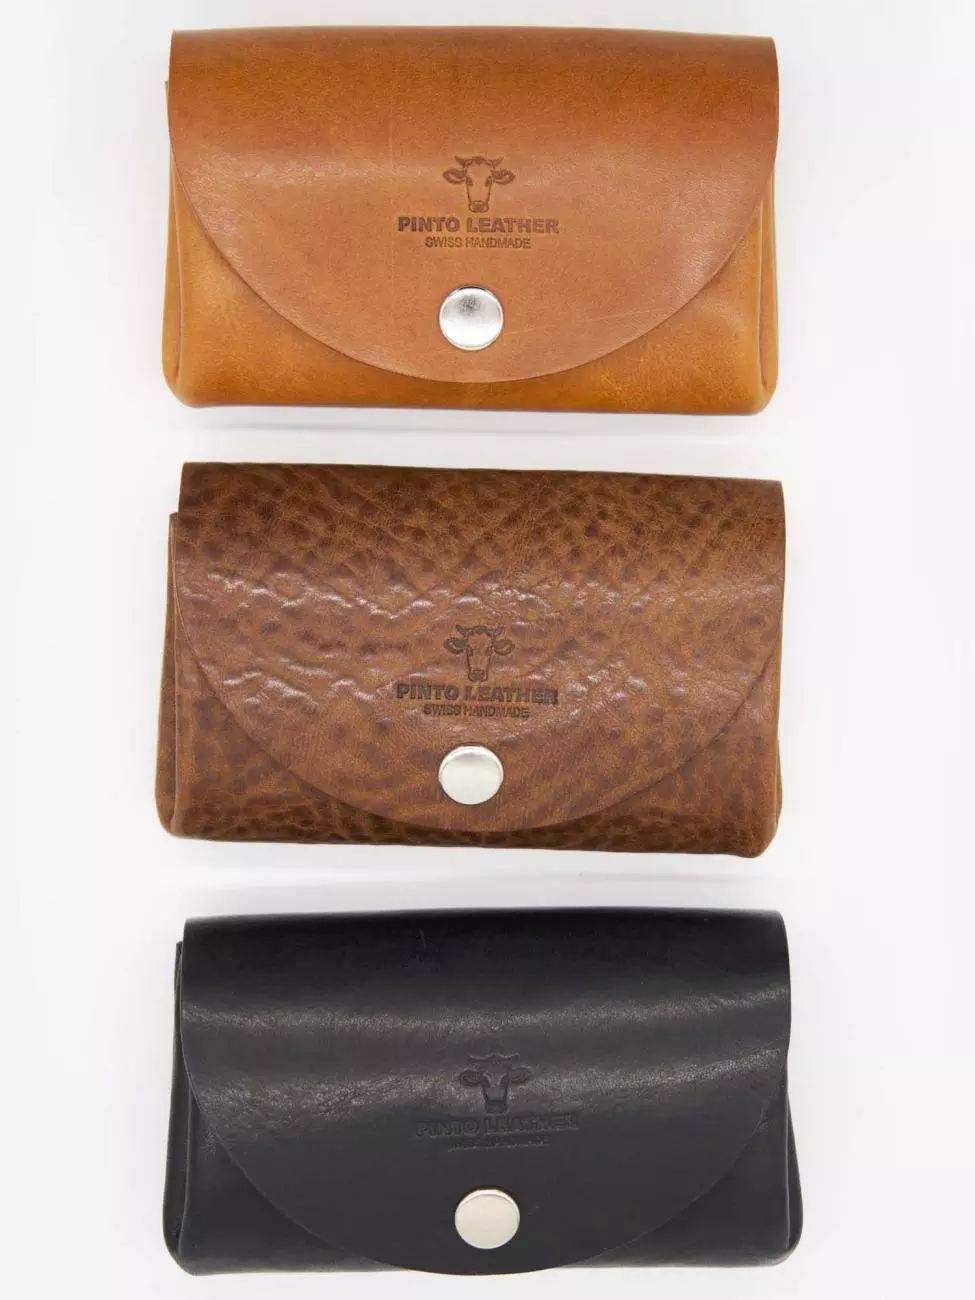 1 - Seamless leather wallet